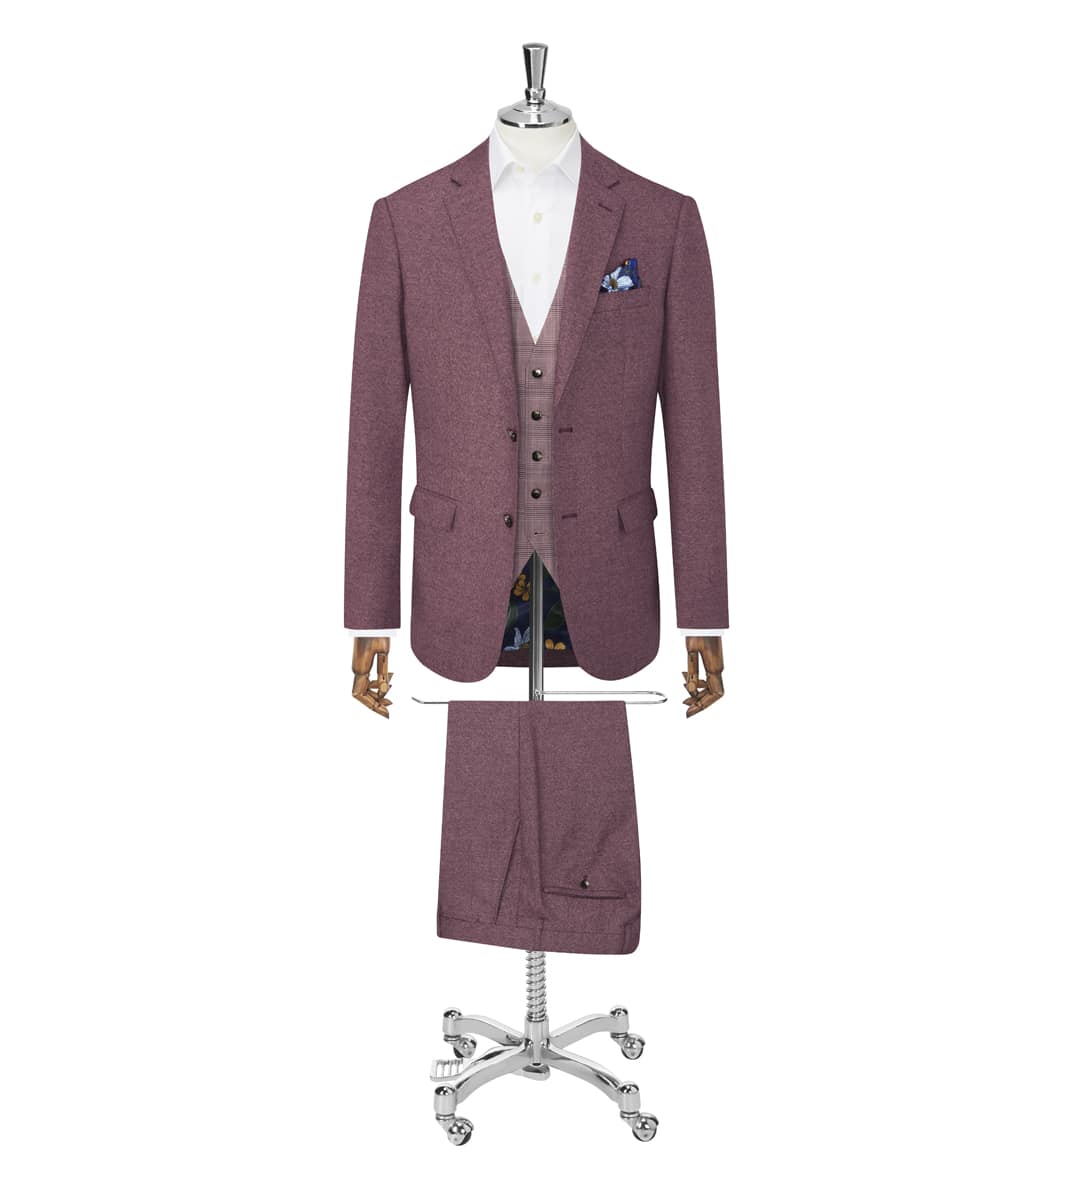 Berry with check waistcoat from our ready to wear suit range